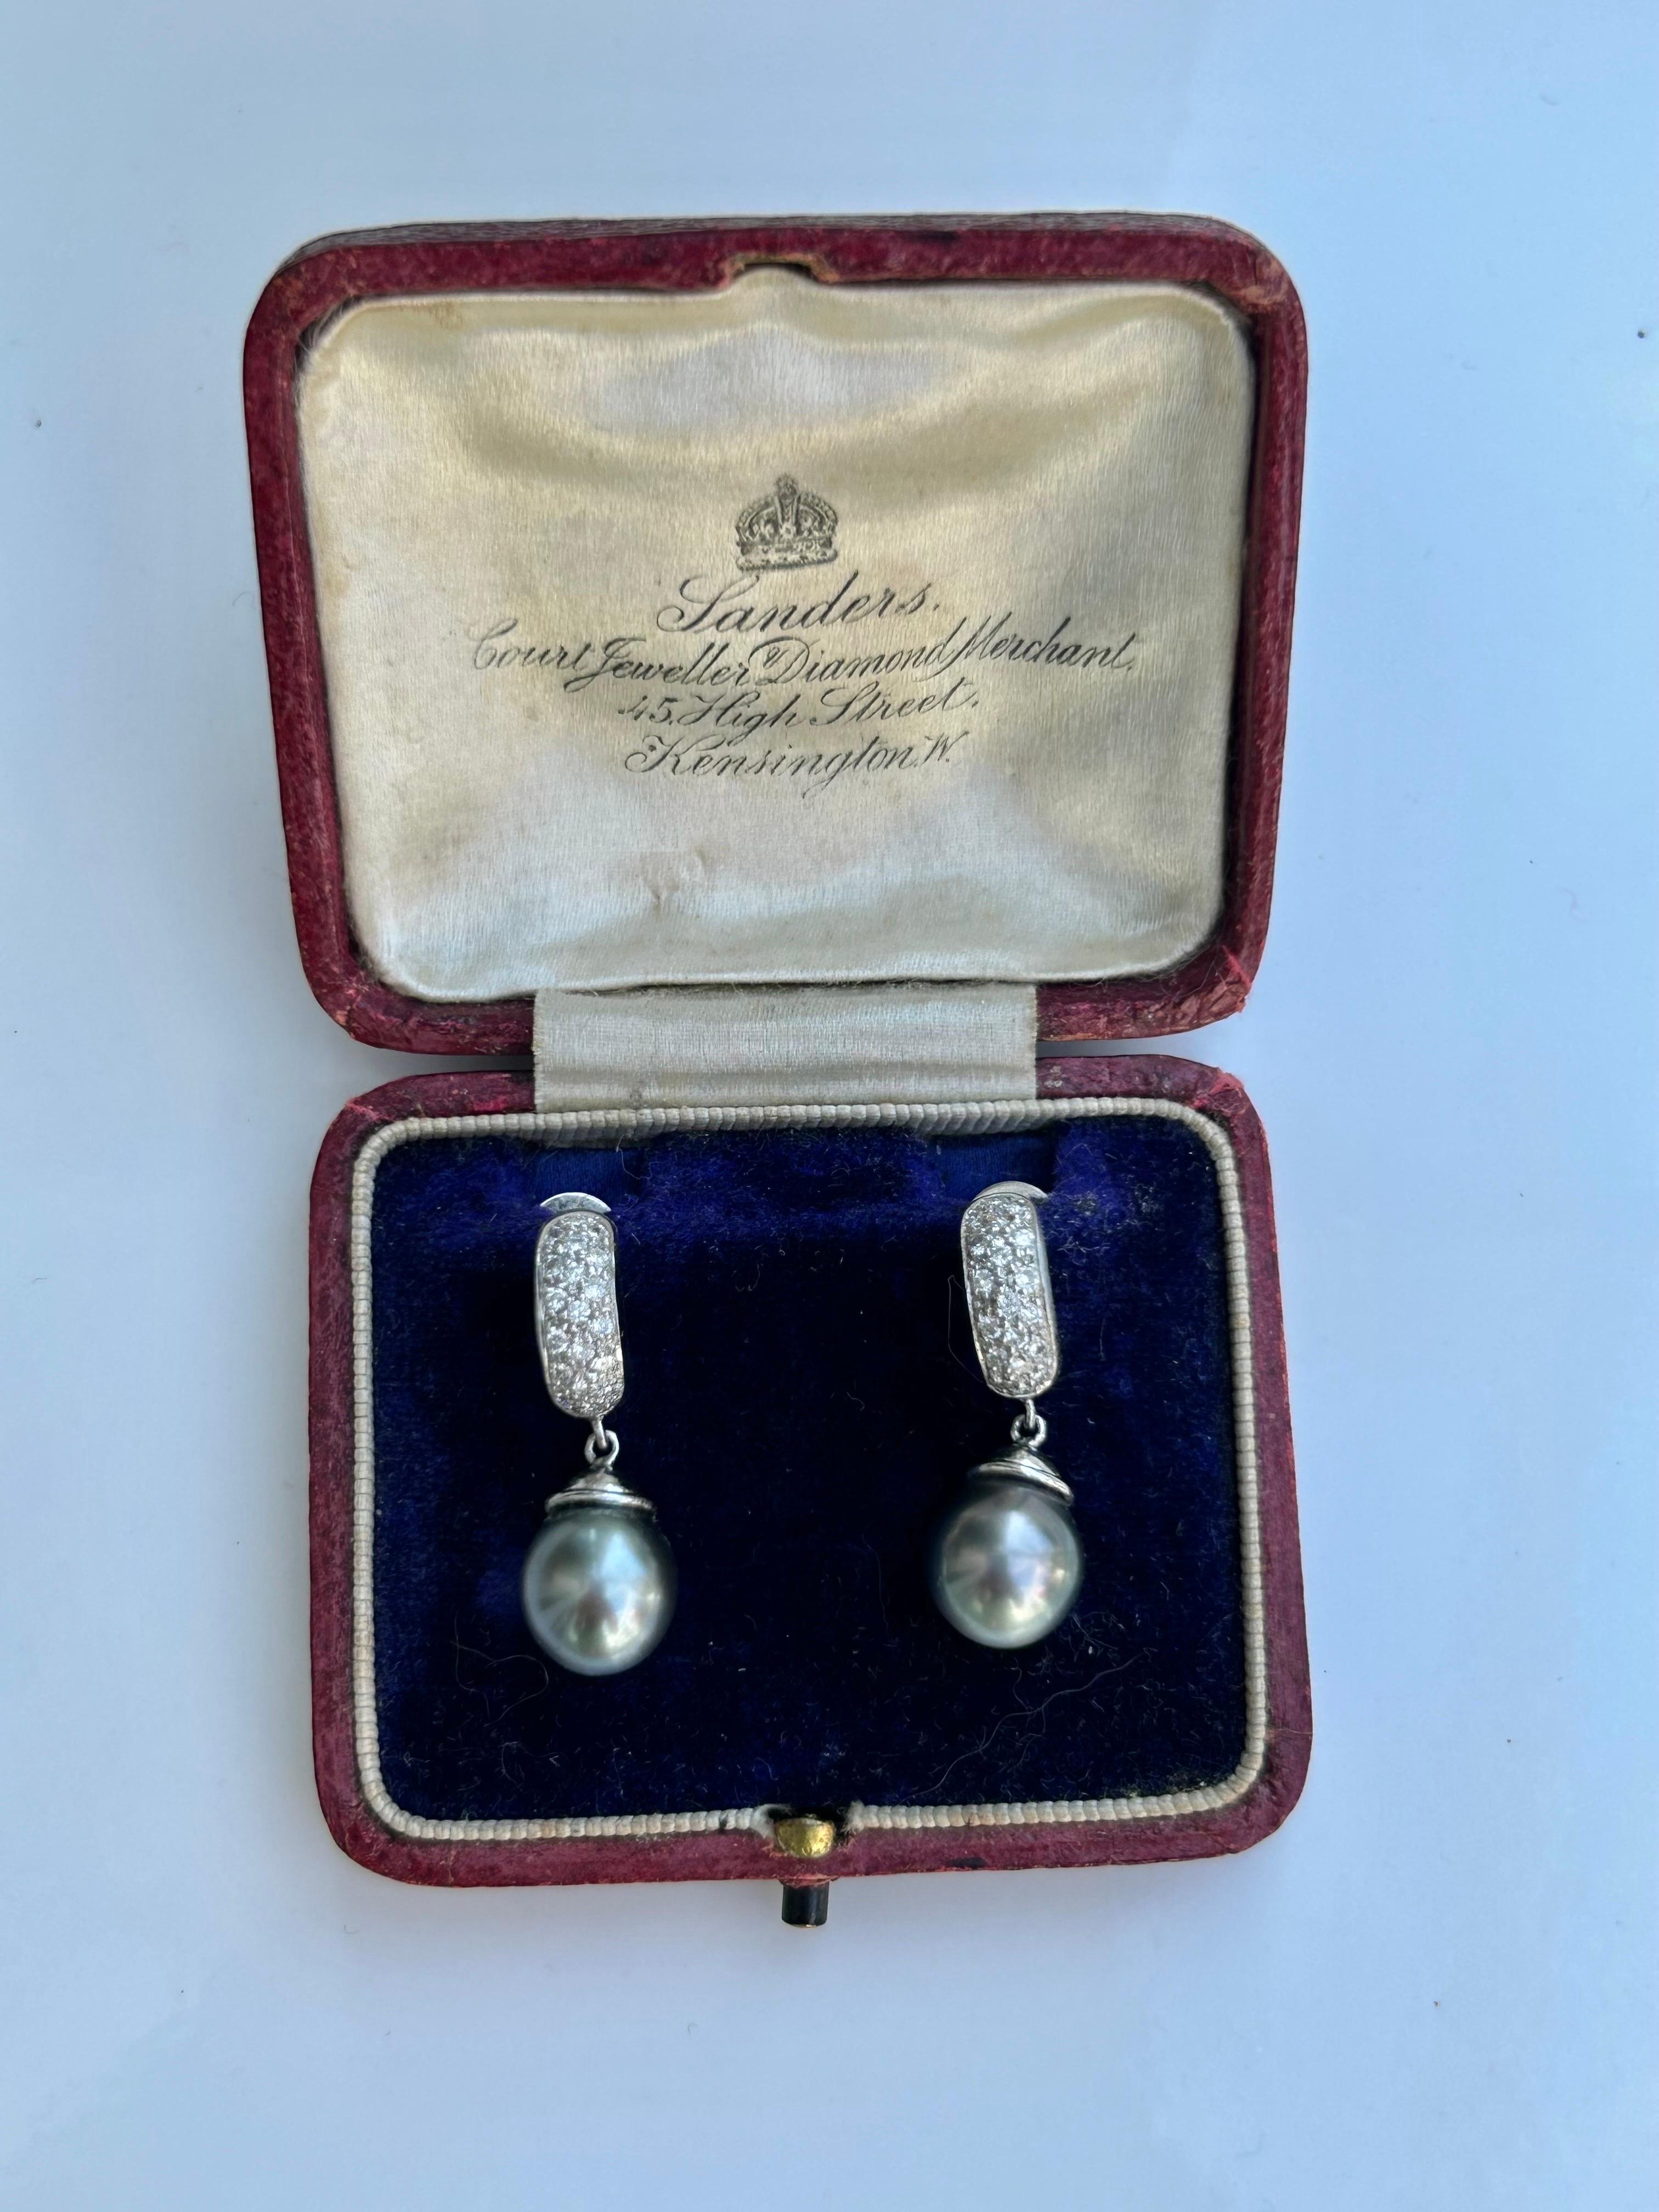 Wonderful Vintage 18ct White Gold Diamond and Pearl Boxed Earrings 

Classy and Elegant 

The item comes with box!

Measurements: weight 7g, size 26mm x 4mm

Materials: 18ct White gold, diamond and Pearl 

Hallmarks: none present 

Condition: the